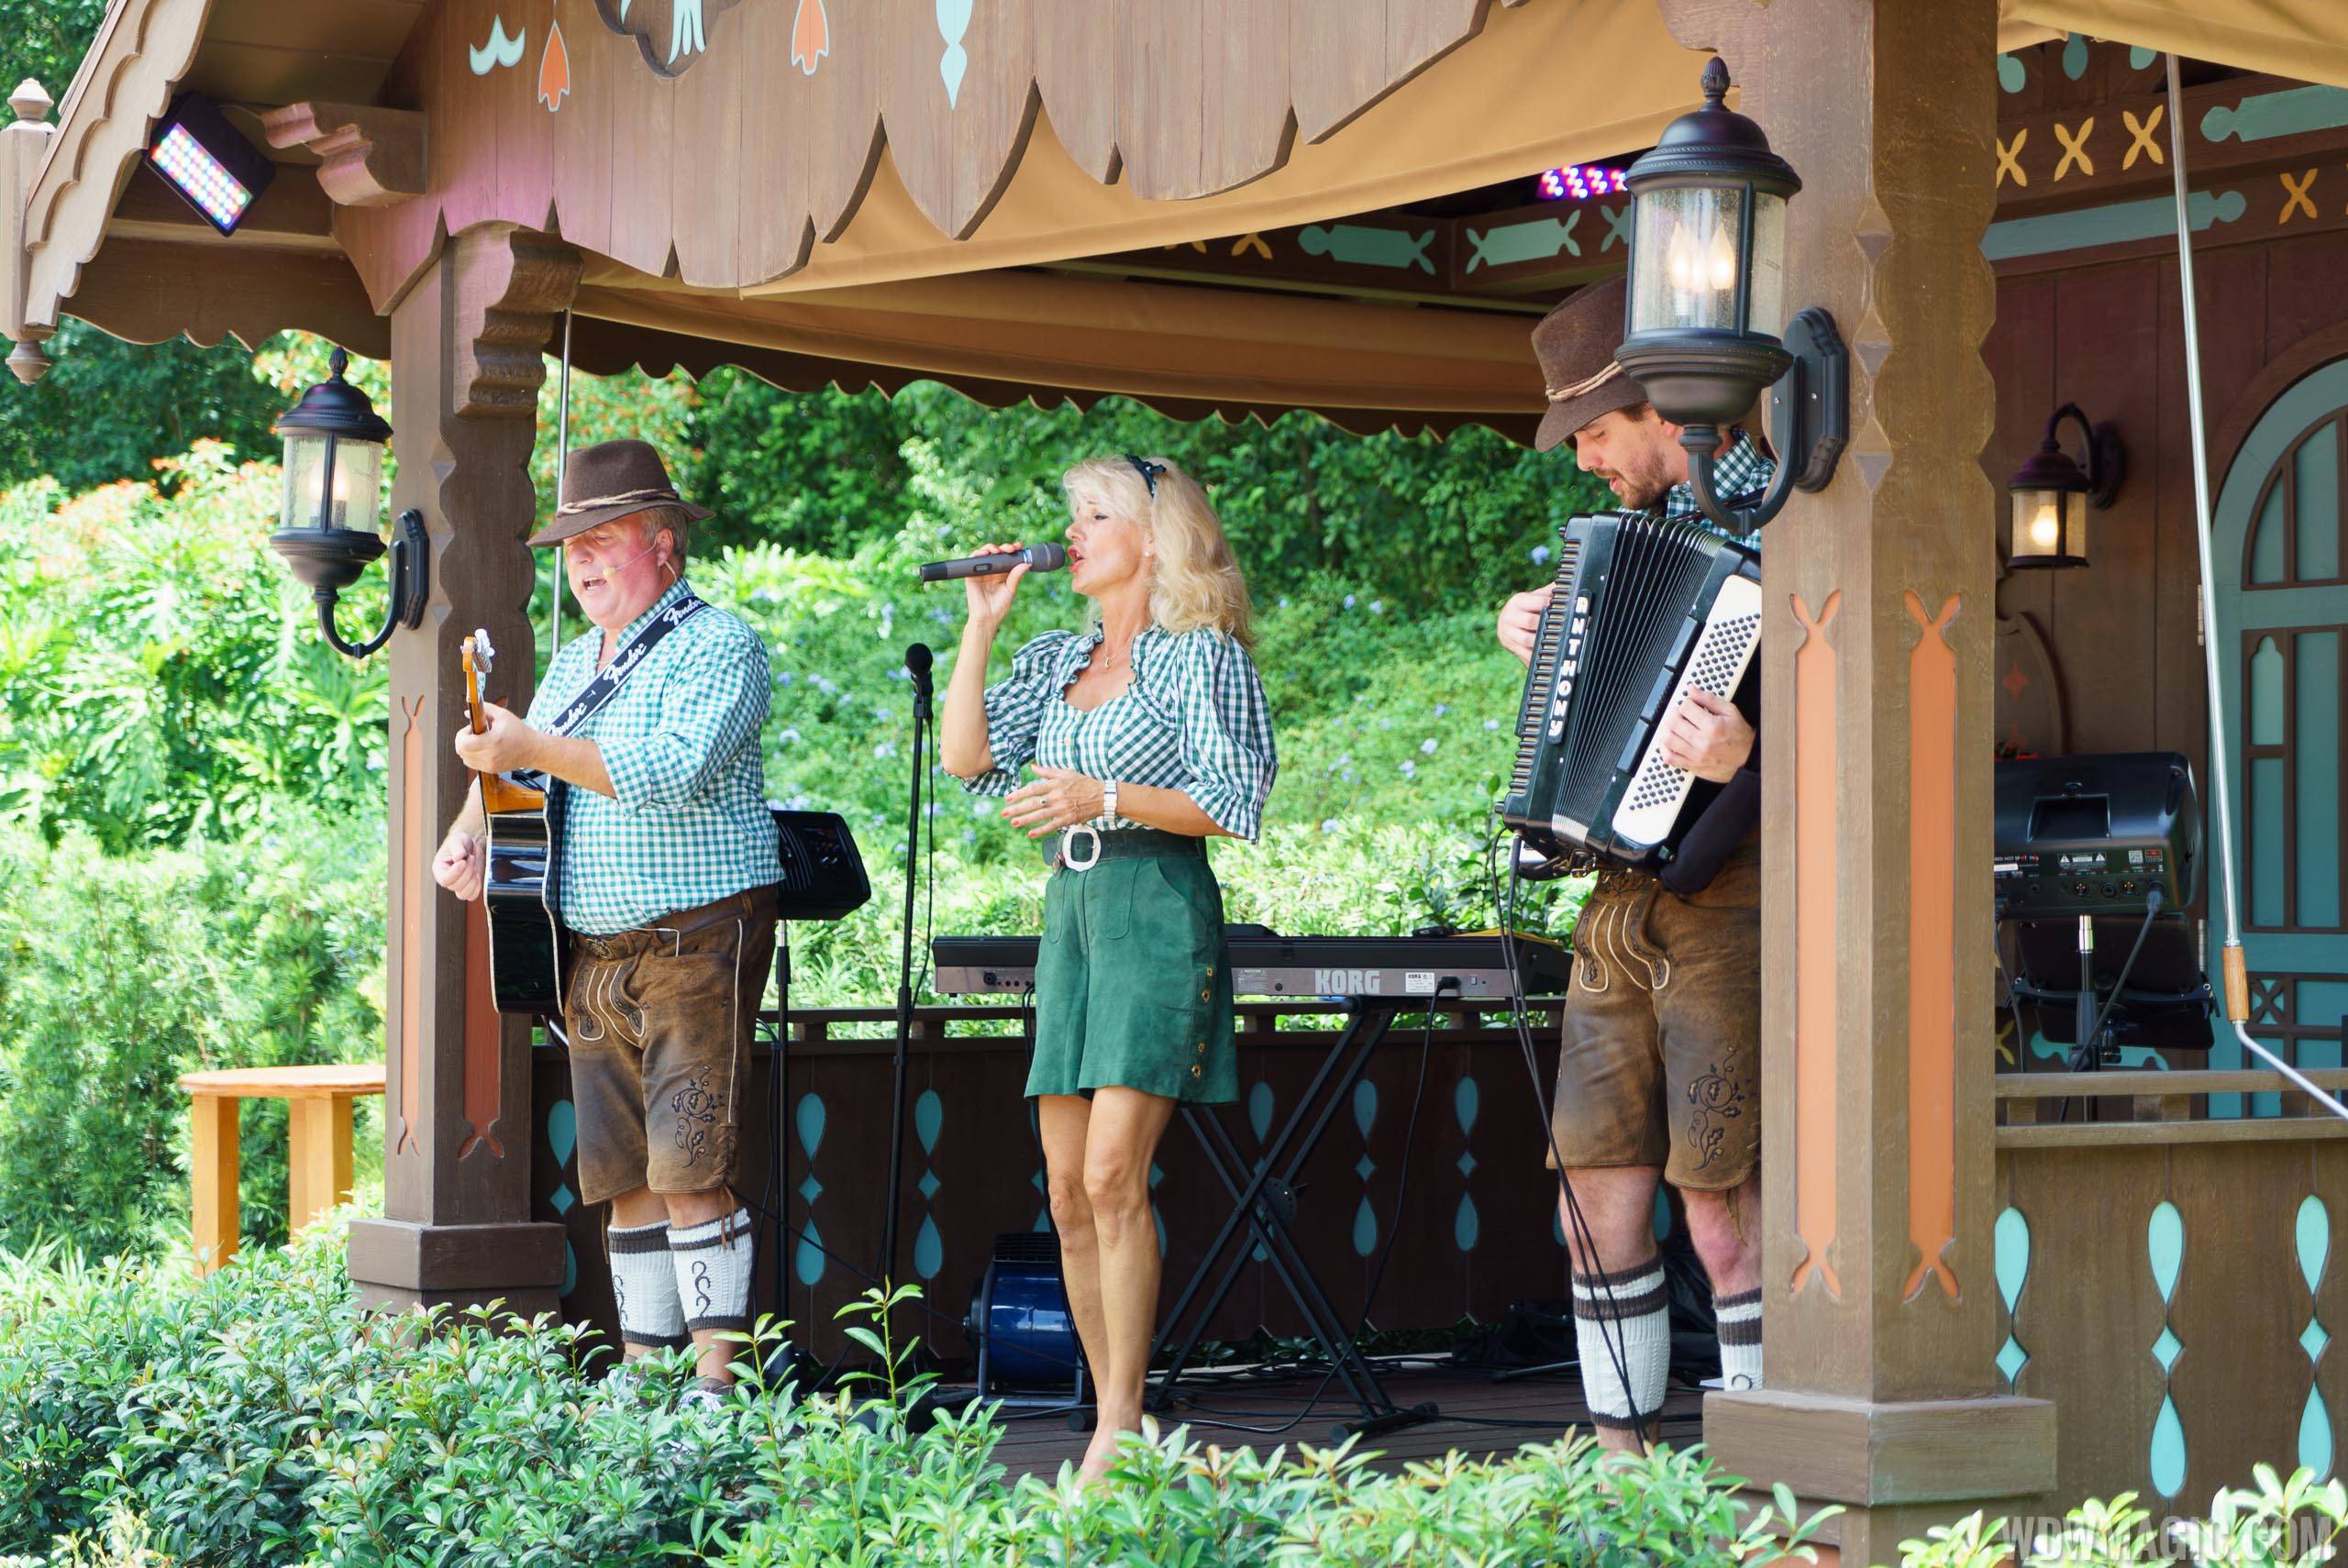 VIDEO - Margret Almer and The Bavarian Band take to the new Germany Pavilion stage